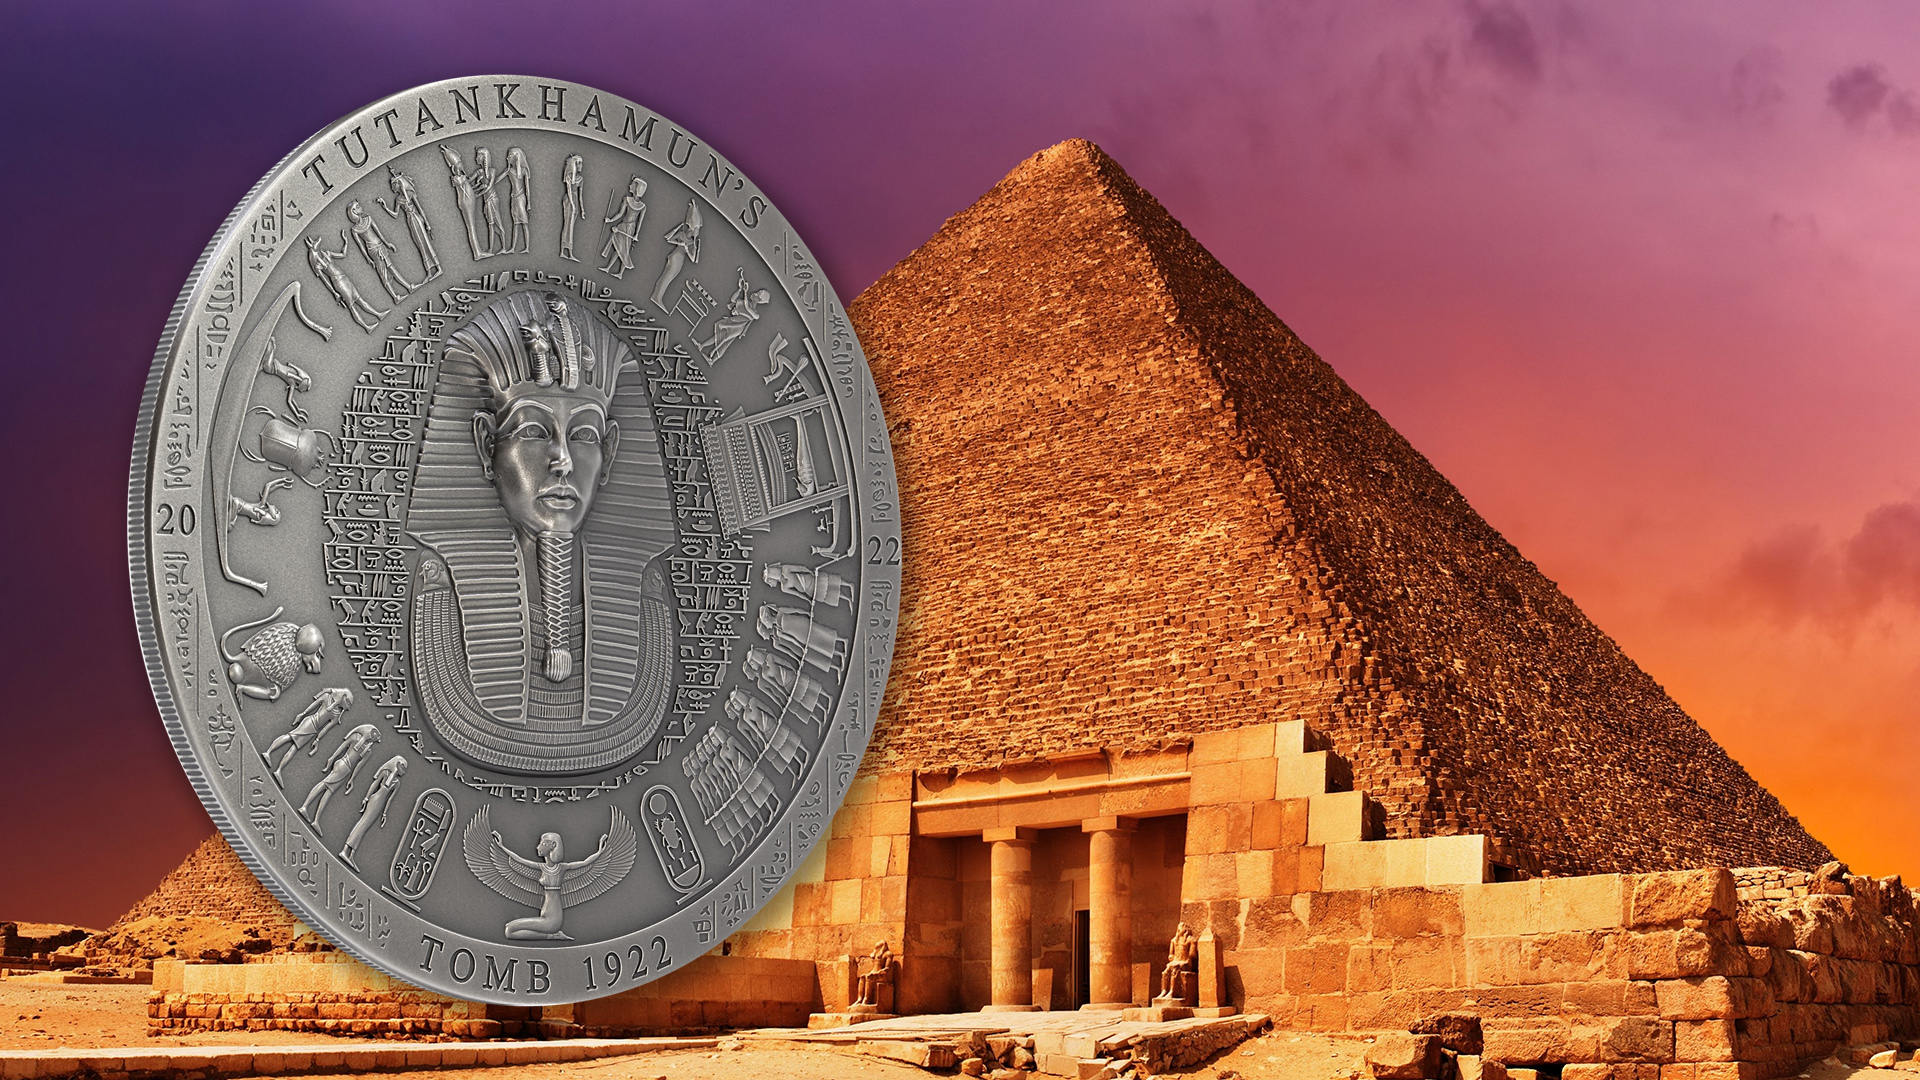 Cook Islands 2022 20 Dollars Tutankhamun's Tomb 1922 Archeology Symbolism Series Silver Coin Antiqued